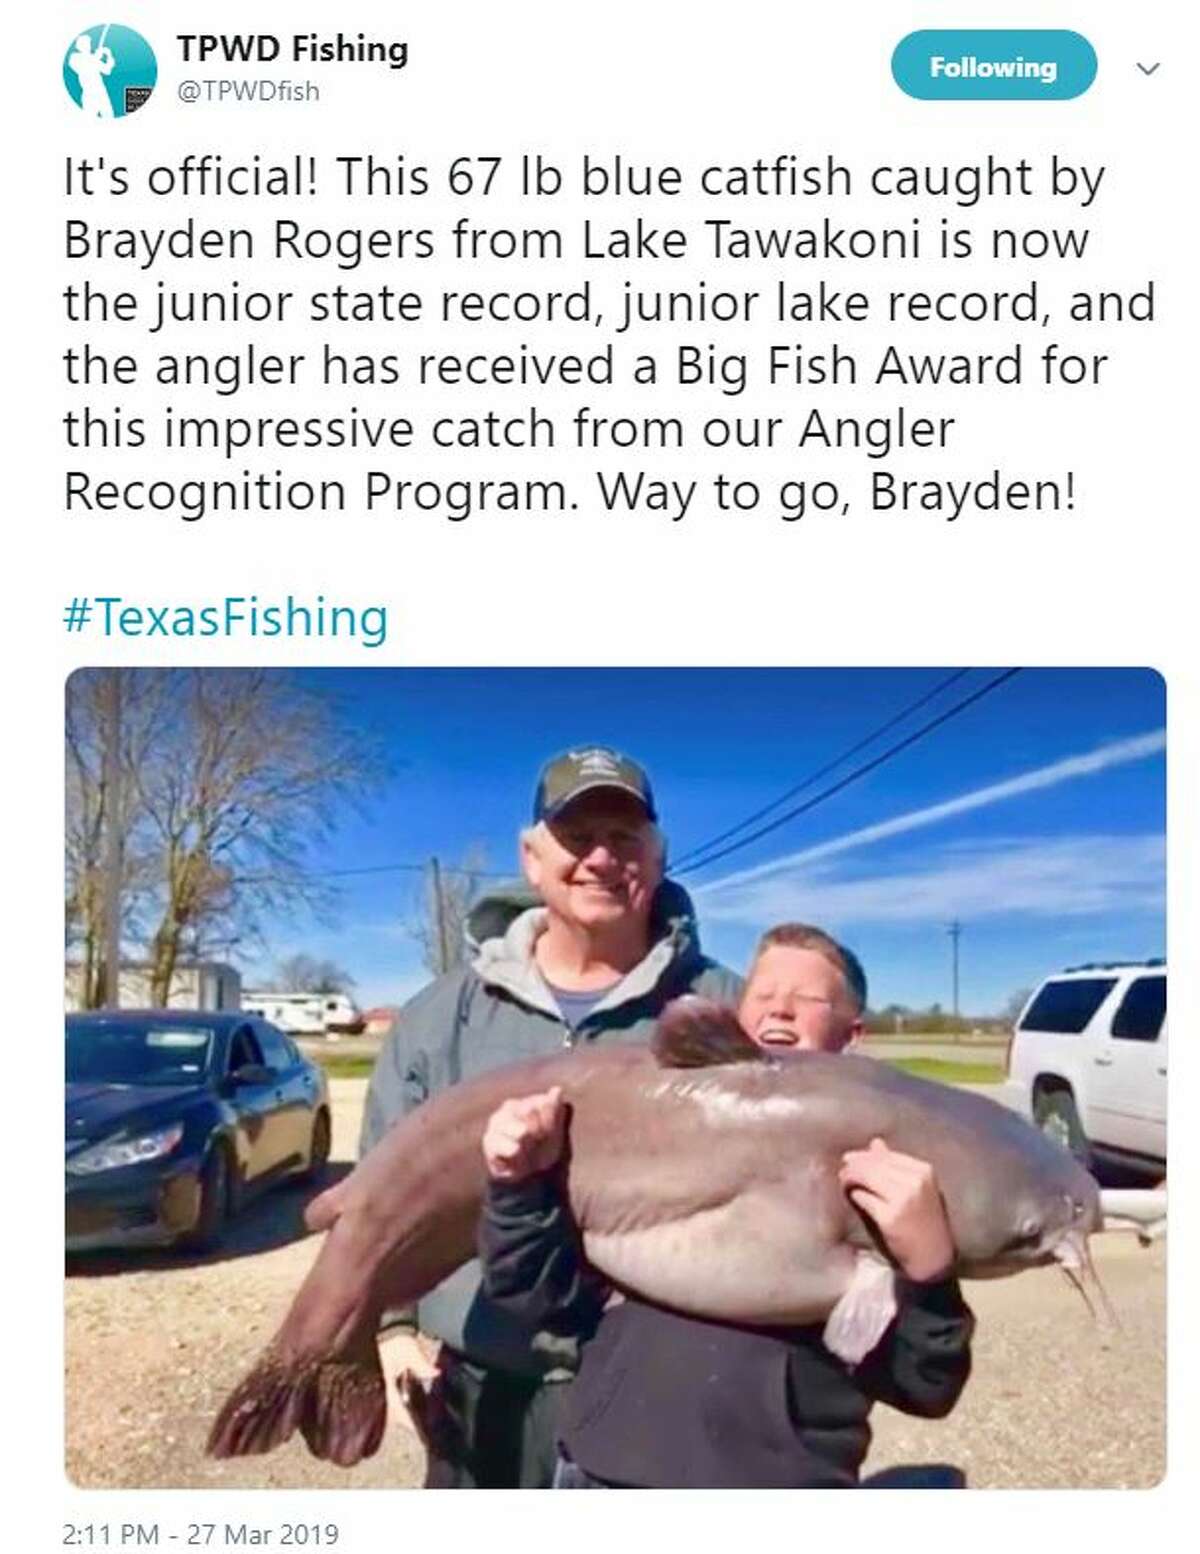 TPWD Fishing @TPWDFish It's official! This 67 lb blue catfish caught by Brayden Rogers from Lake Tawakoni is now the junior state record, junior lake record, and the angler has received a Big Fish Award for this impressive catch from our Angler Recognition Program. Way to go, Brayden! #TexasFishing